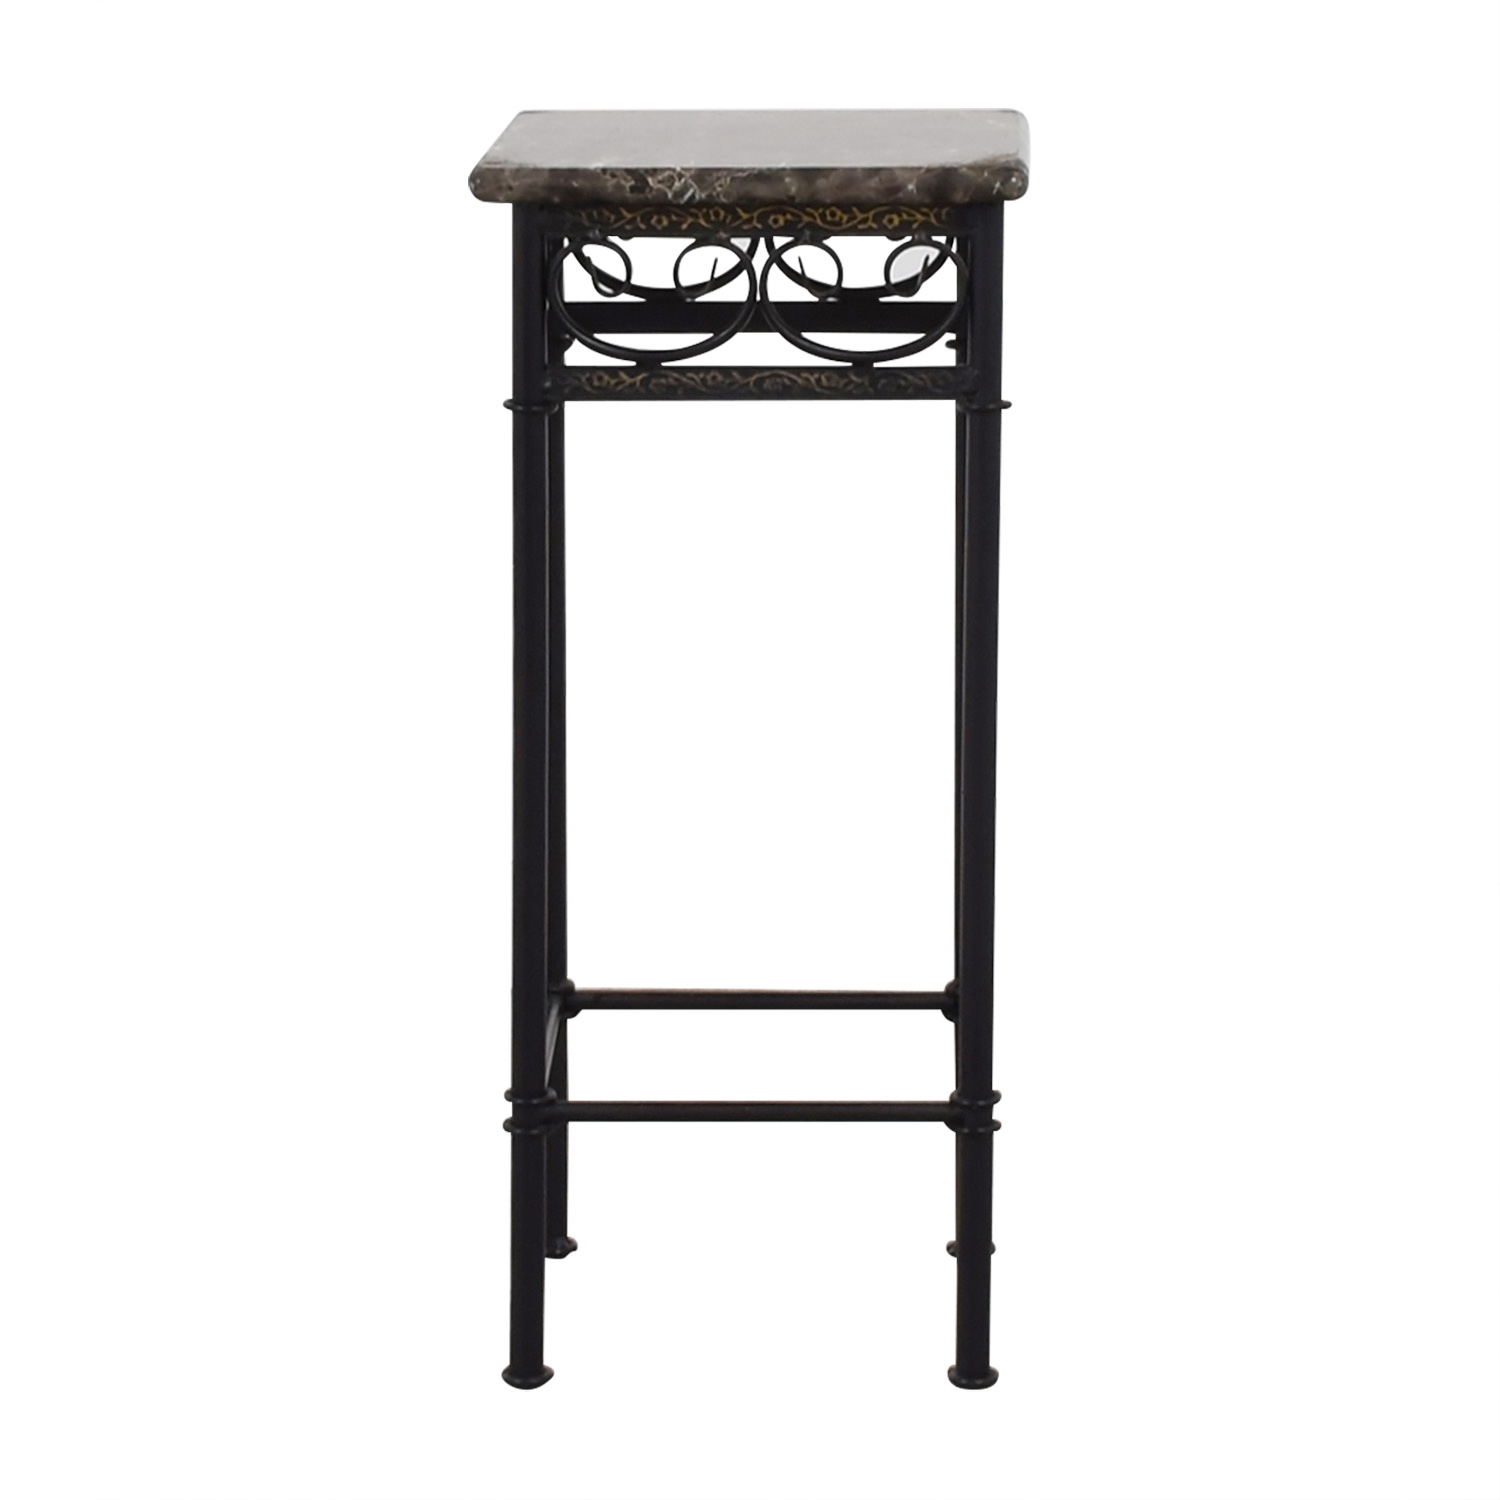 off faux marble with black metal base accent table tables patio depot kidney coffee hampton bay furniture website bengal manor mango wood twist small kitchen and chairs clear